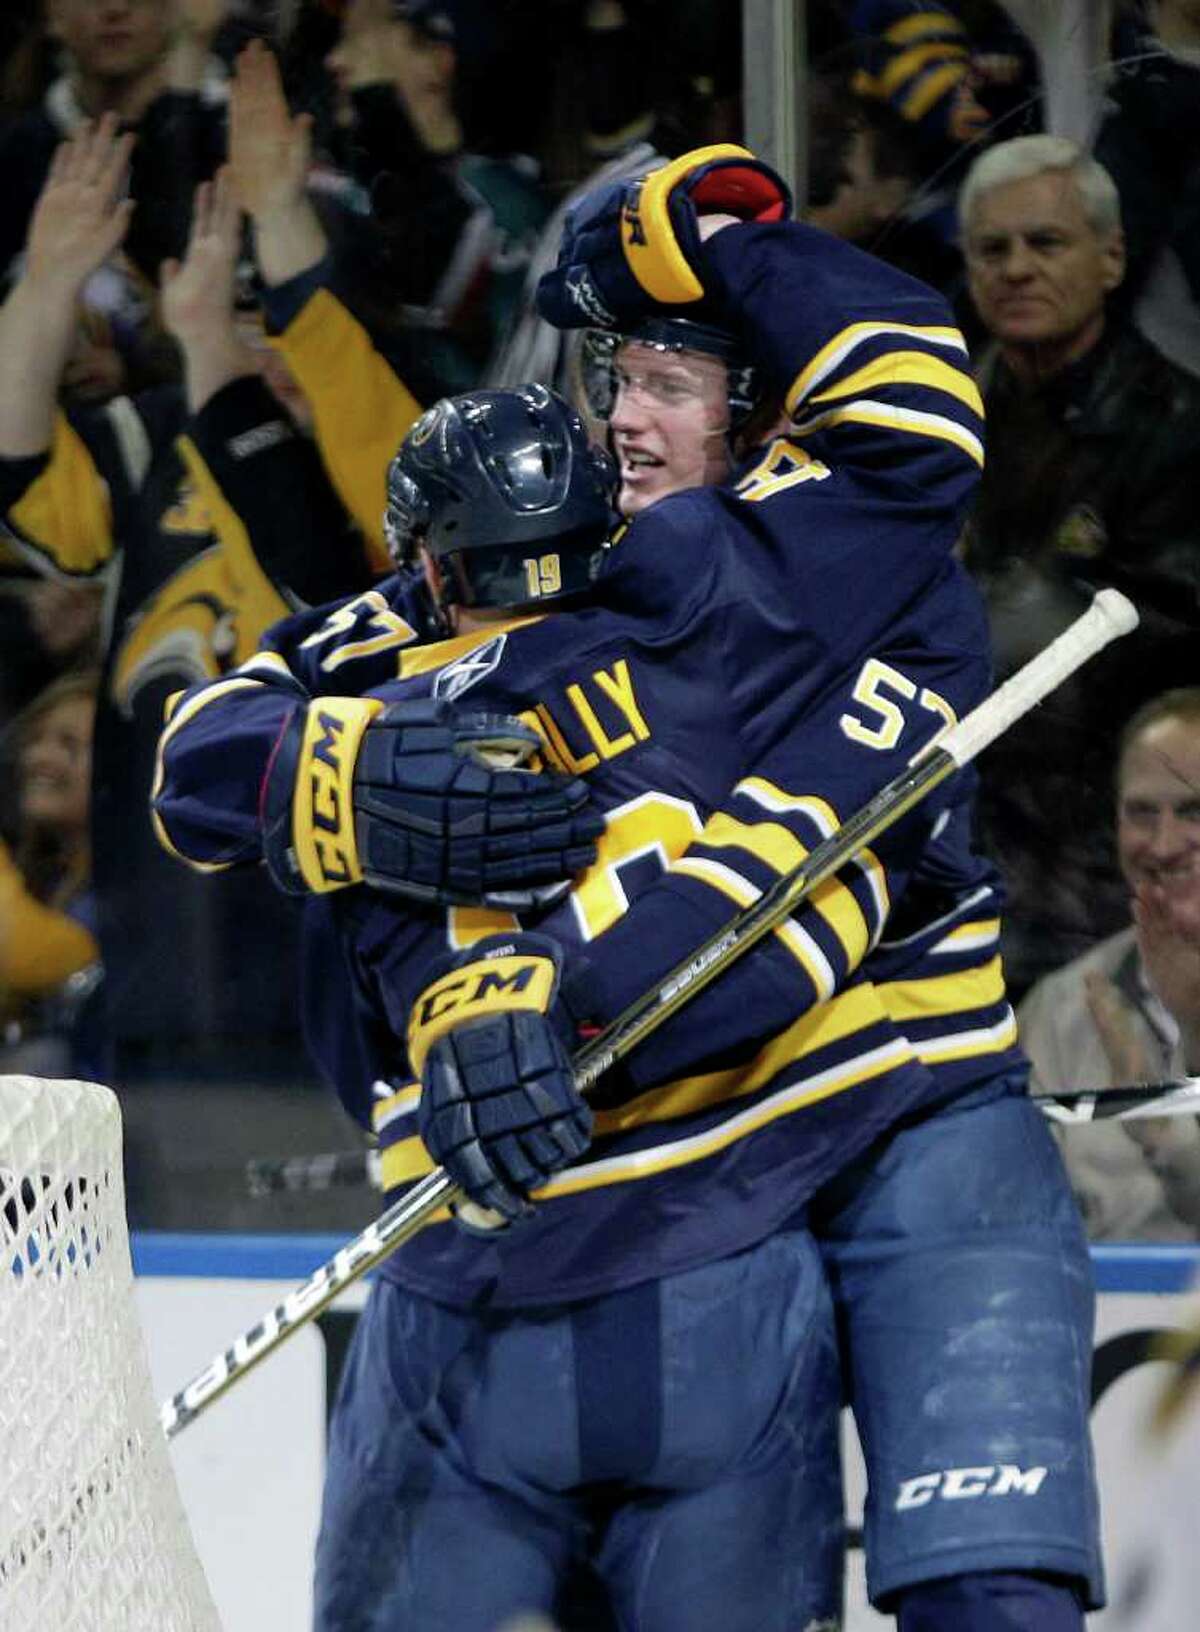 Buffalo Sabres' Tyler Myers (57) celebrates his goal with Tim Connolly (19) against the Atlanta Thrashers during the first period of an NHL hockey game in Buffalo, N.Y., Wednesday, Feb. 23, 2011. (AP Photo/David Duprey)